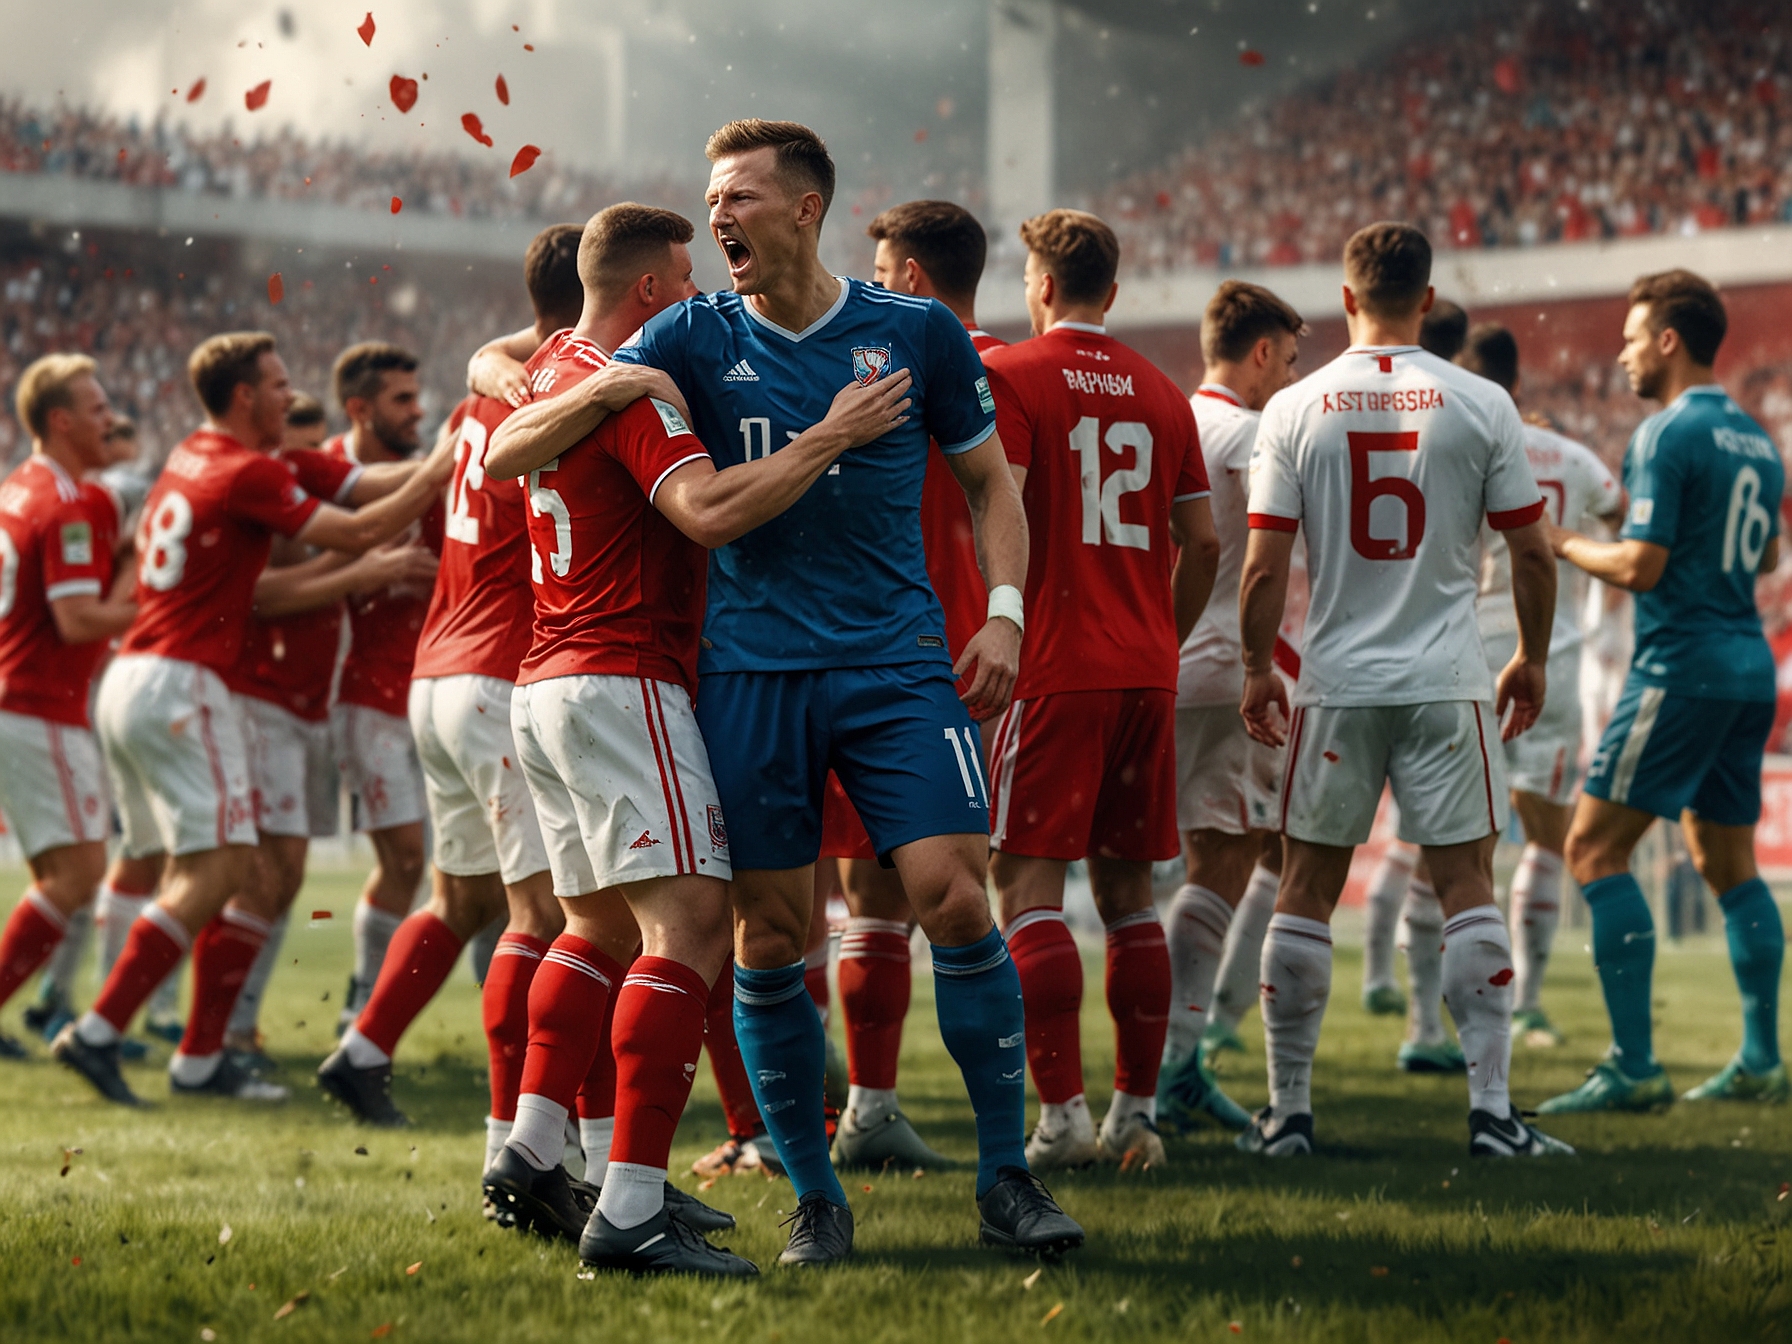 An image showcasing a tense football match between Poland and Austria, highlighting both teams' intense rivalry and skillful players, set against a backdrop of a roaring crowd.